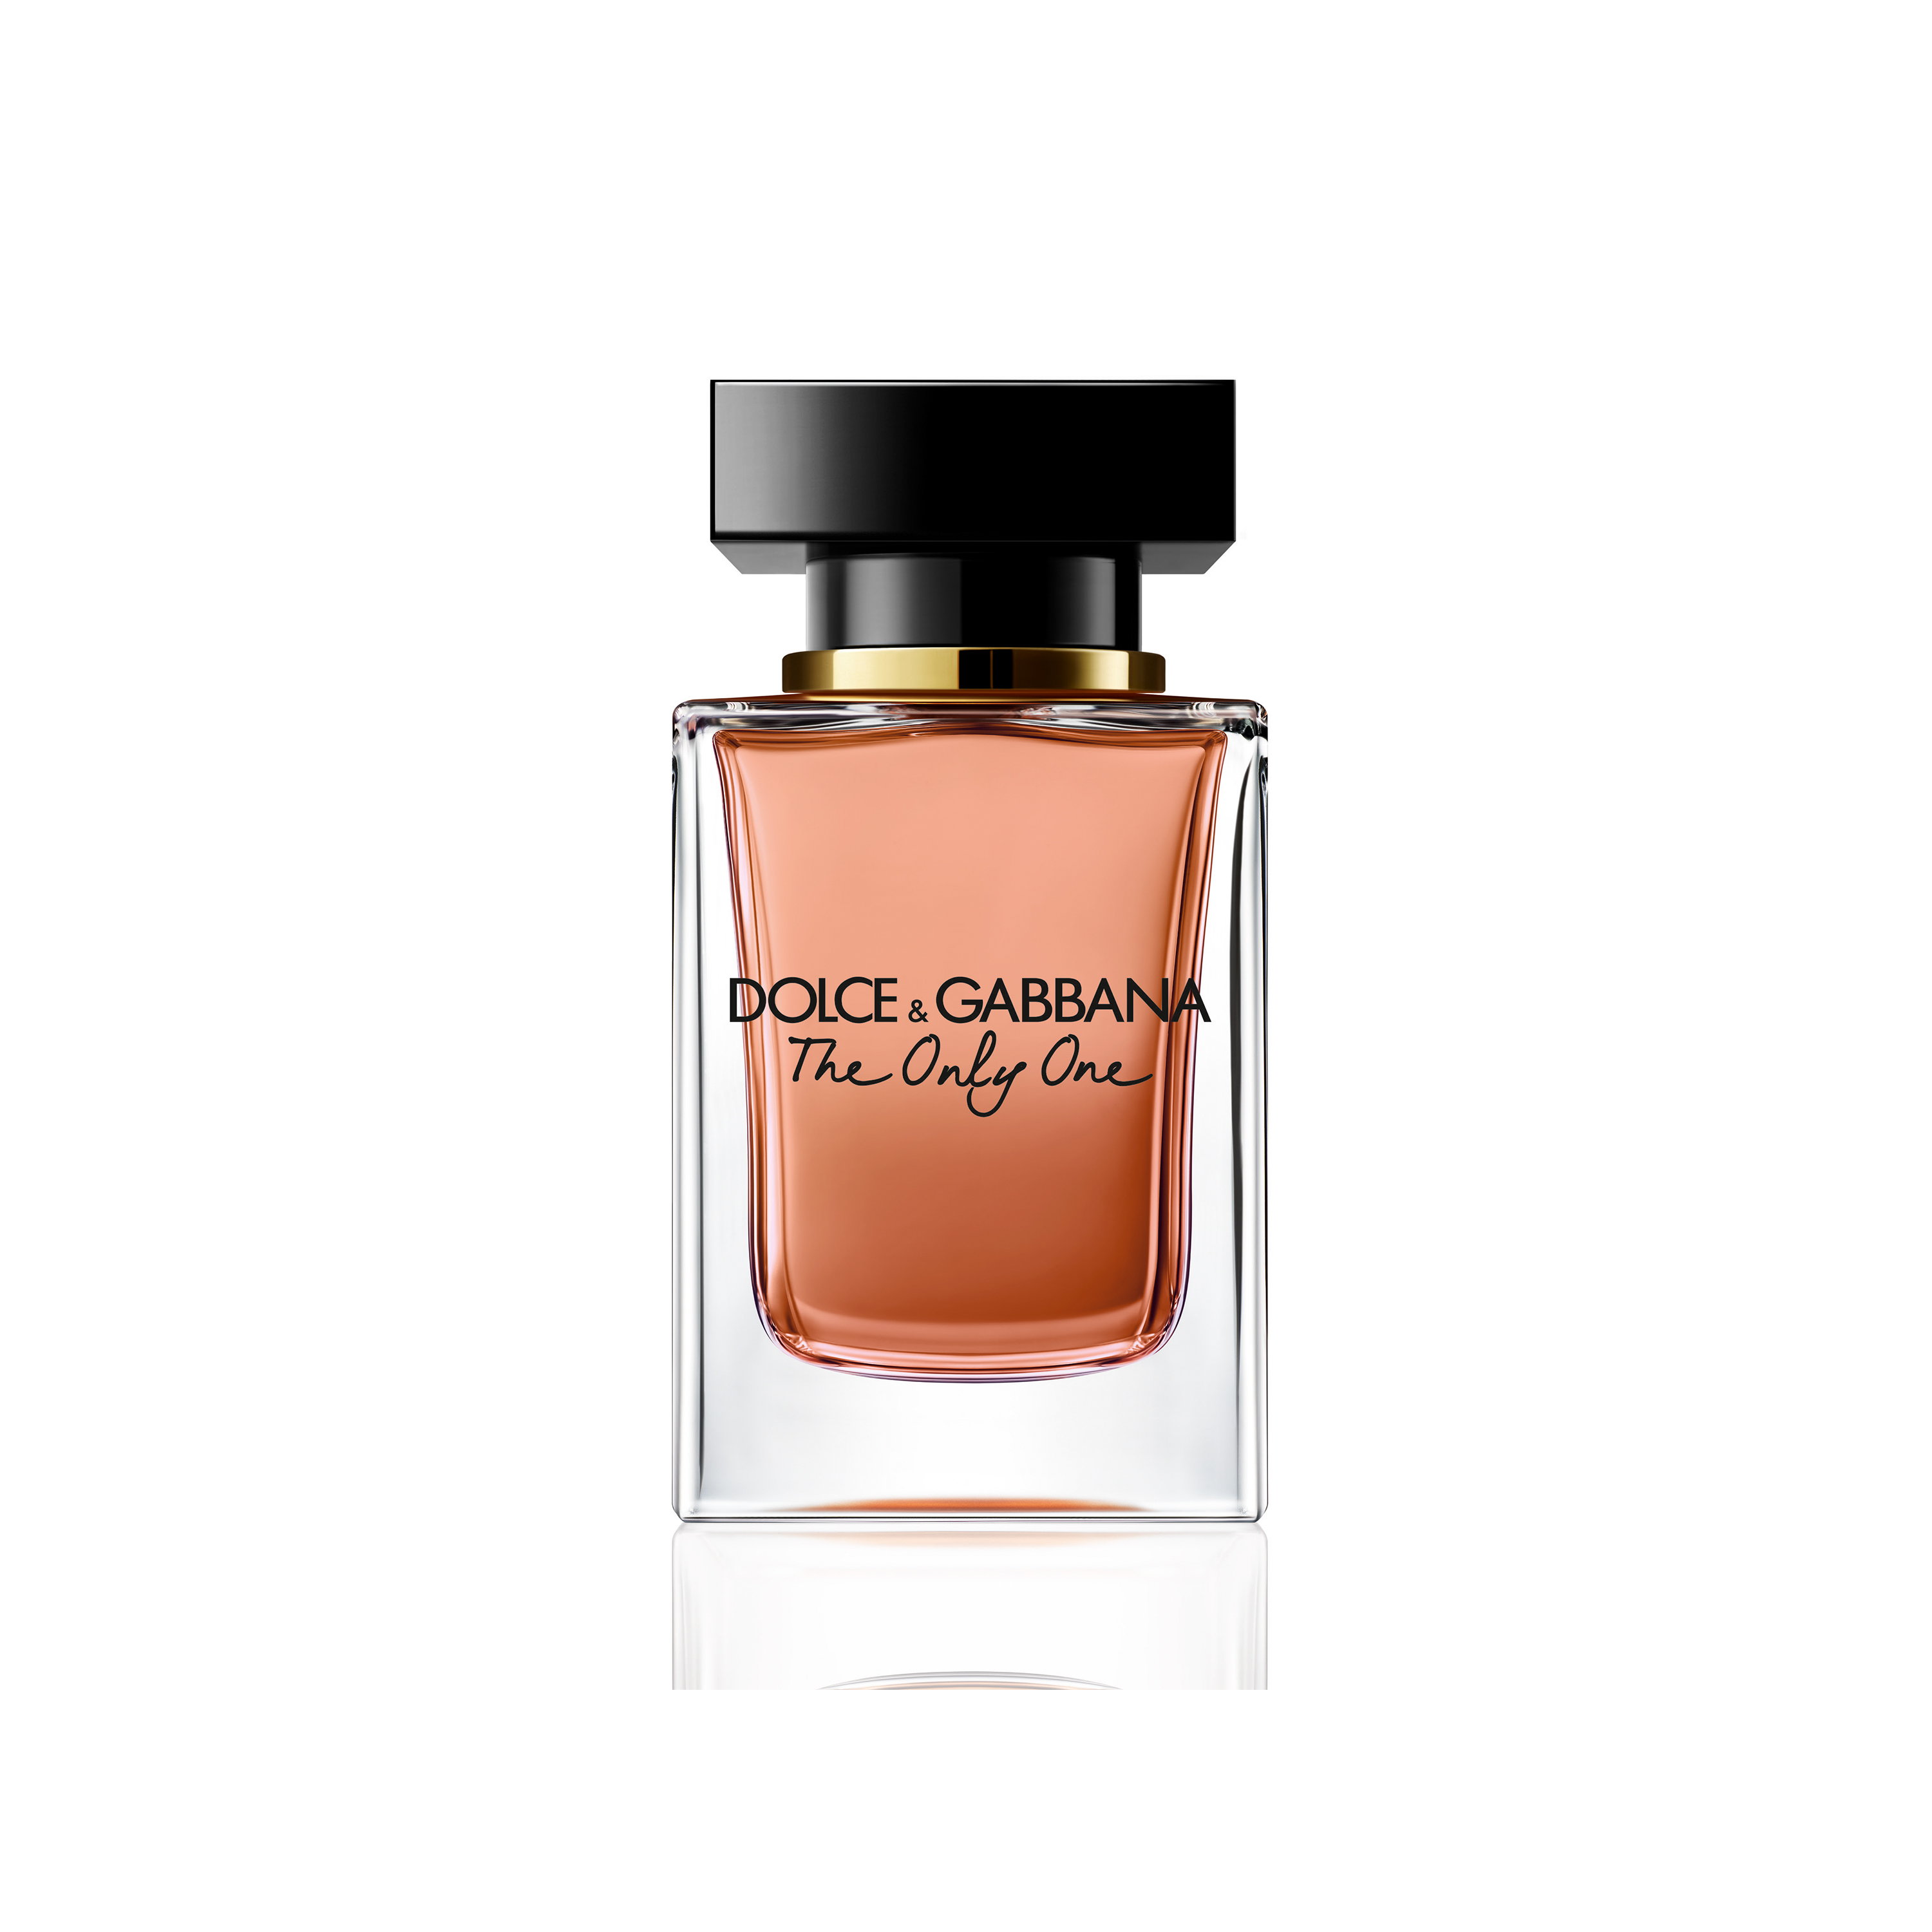 The Only One Edp 50 Ml Dolce And Gabbana Kicks